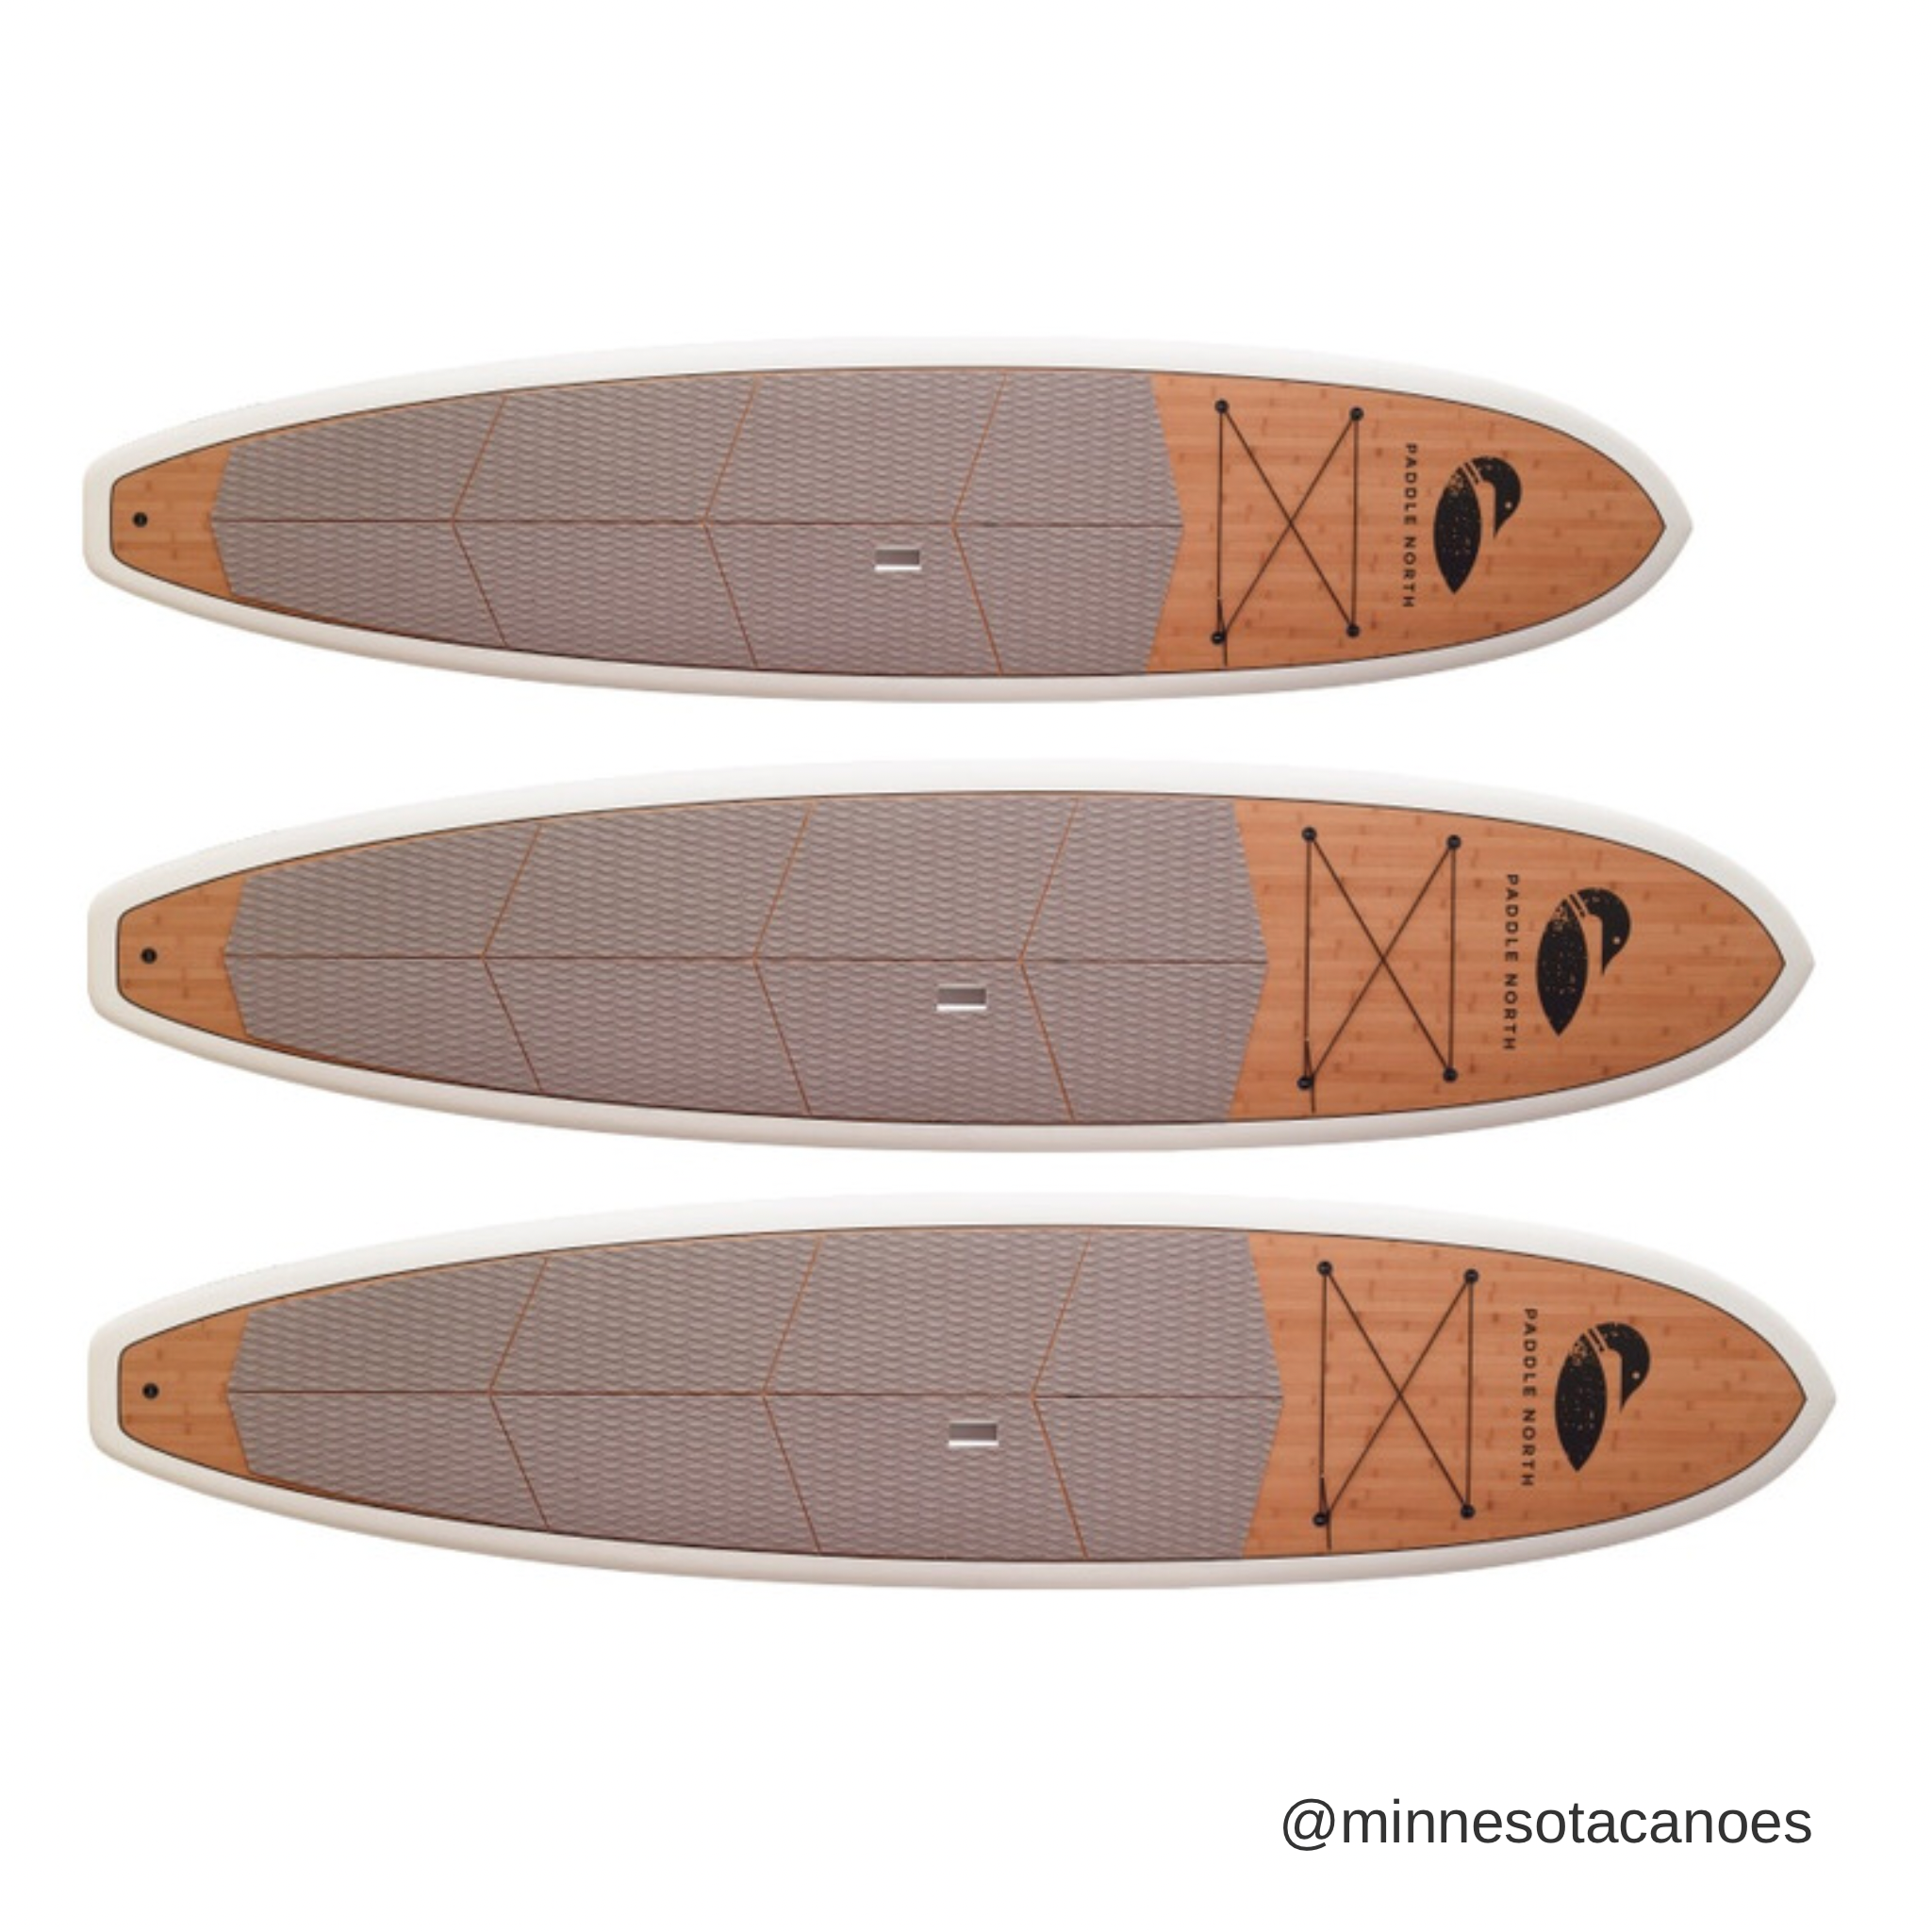 Loon 11' 6" Paddle North Paddle Board